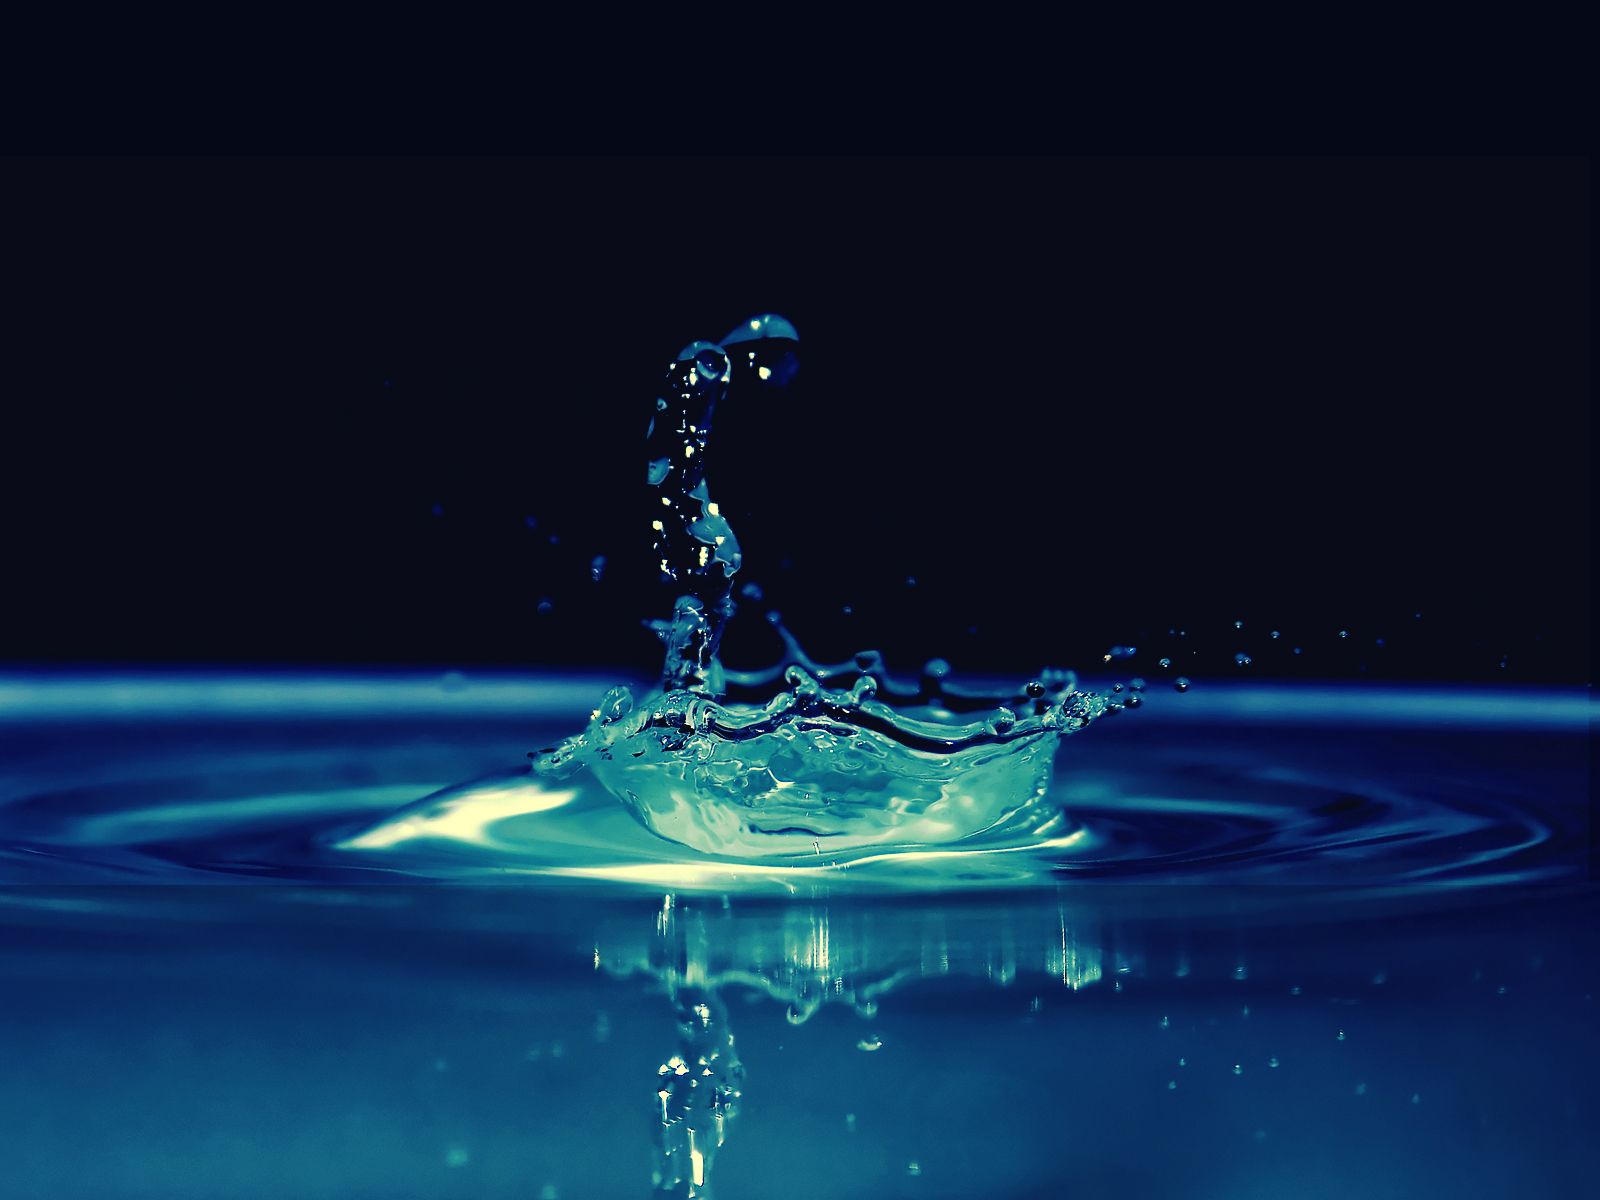 Water Live Wallpaper Android Phones #4228 Wallpaper | High Quality ...